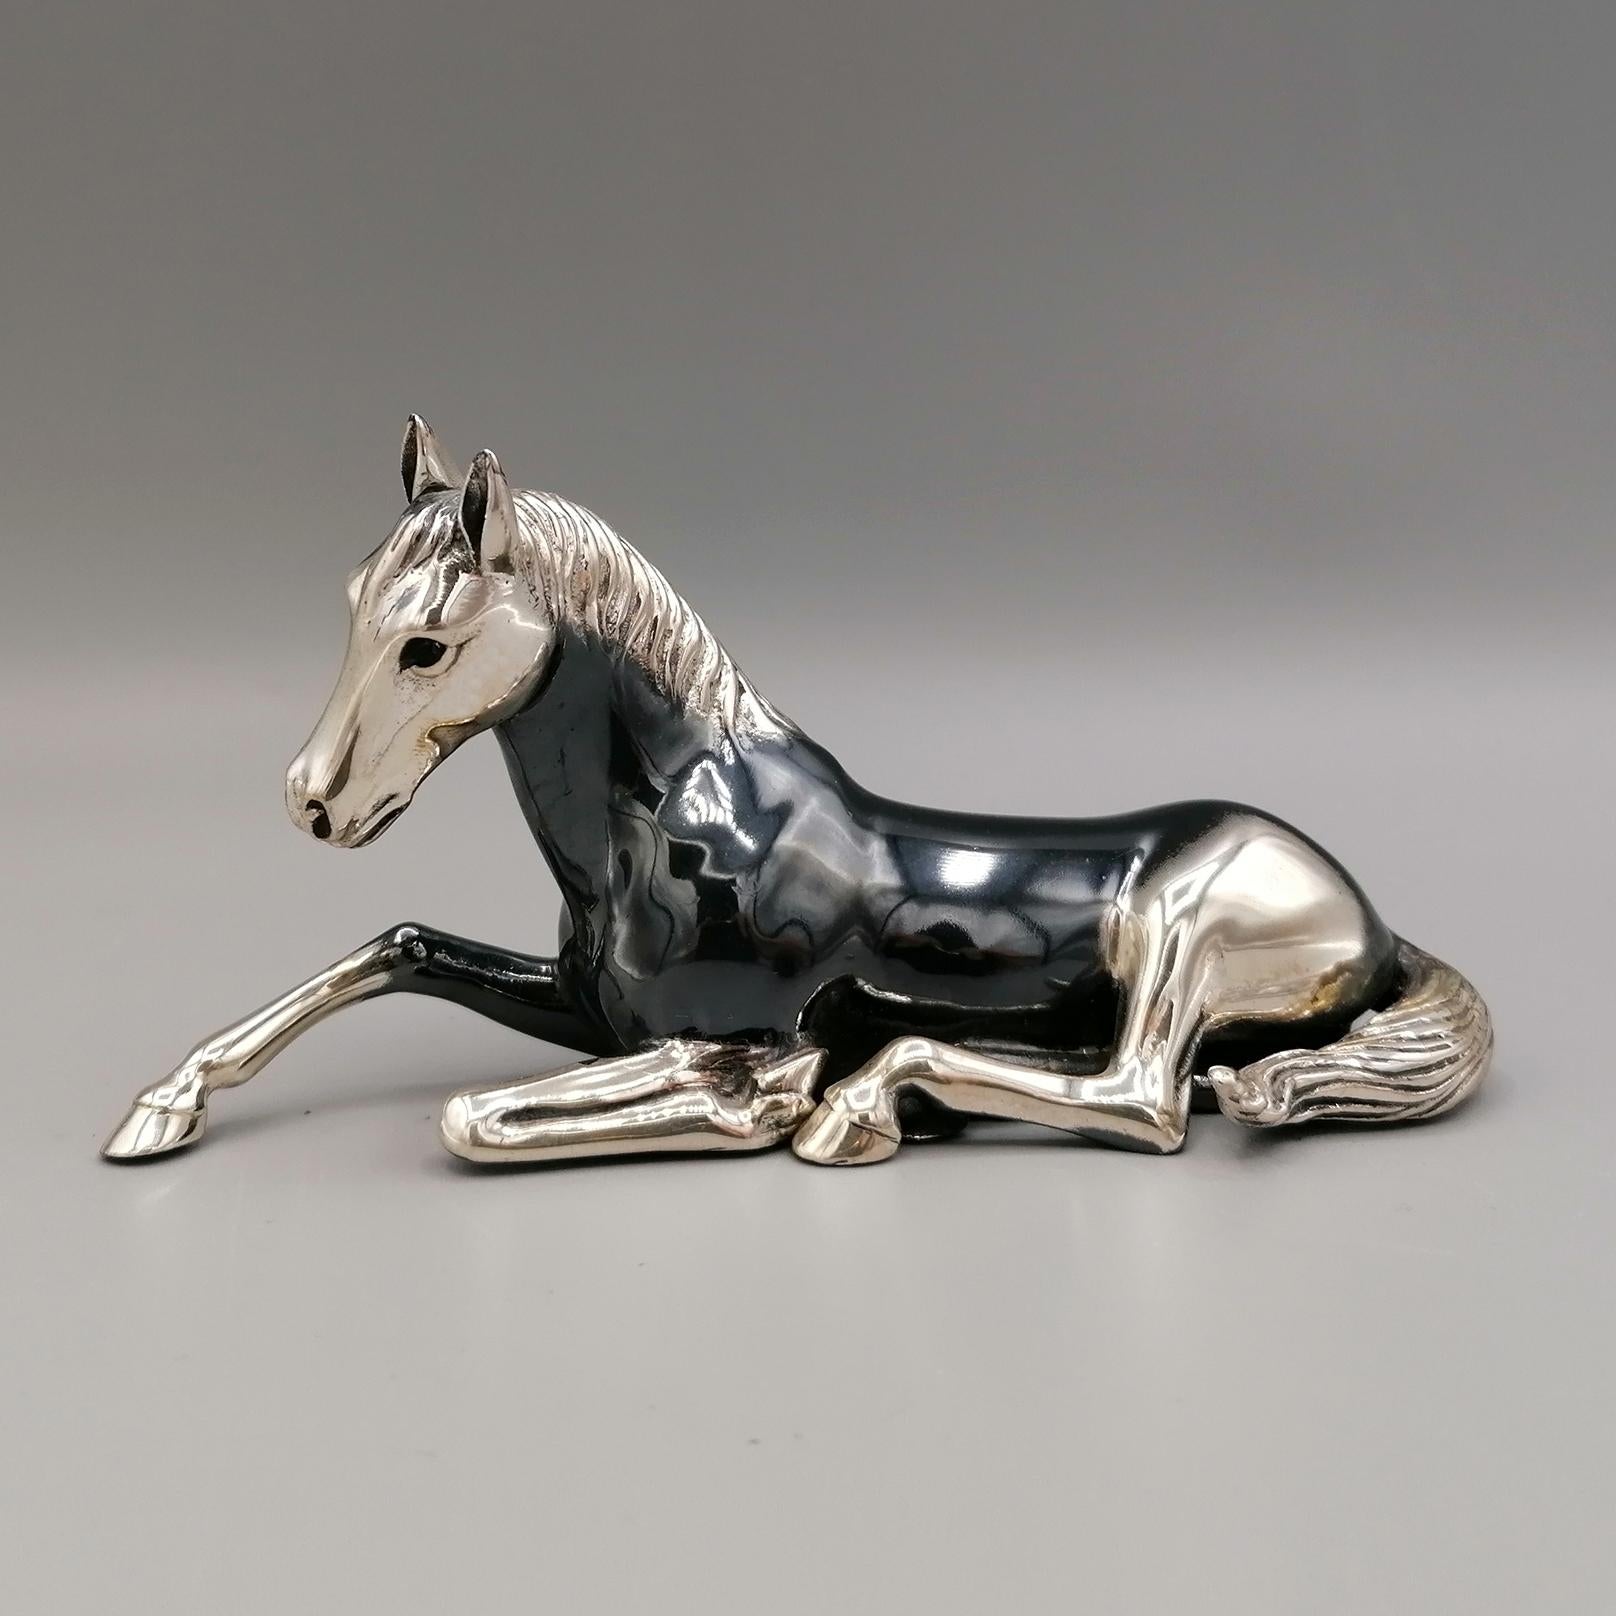 Horse figurine in 800 solid silver.
The object was made with the technique of fusion in two halves and subsequently joined by welding. 
In the lower part of the statuette you can see the two holes made to let the welding vapors escape.
The horse's